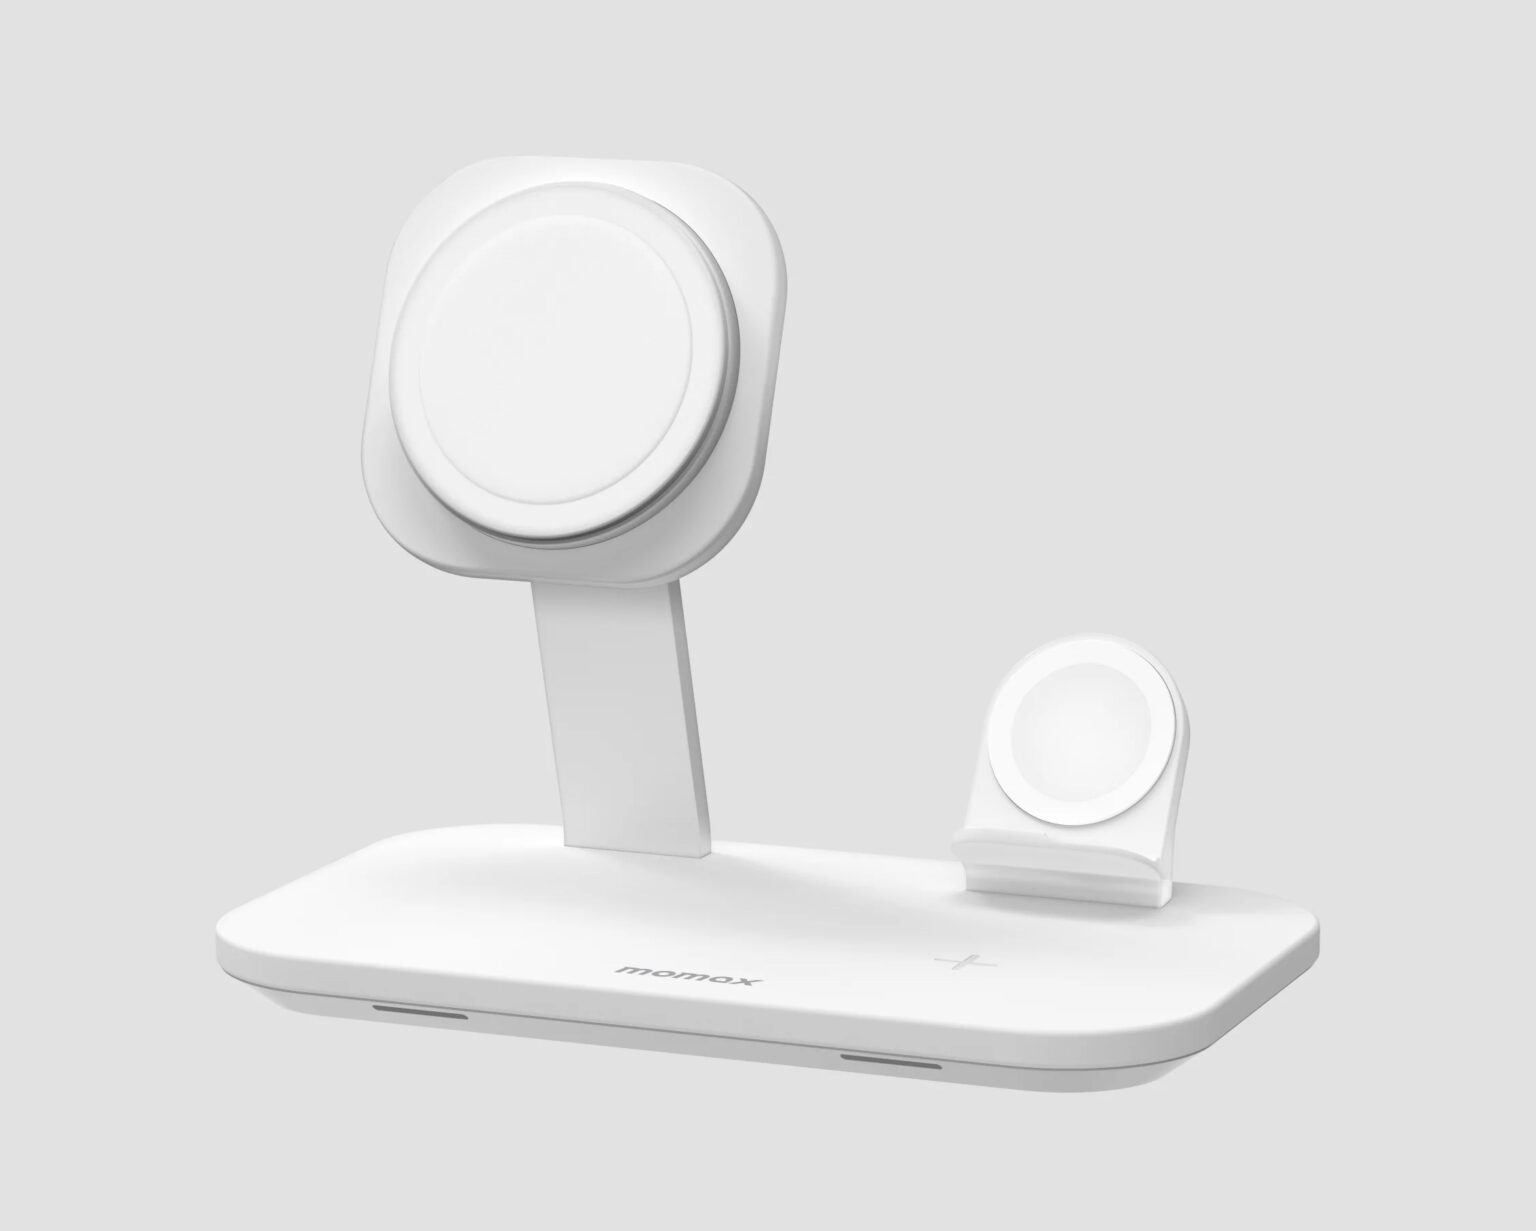 The Momax 3-in-1 stand charges your iPhone, AirPods case and Apple Watch.